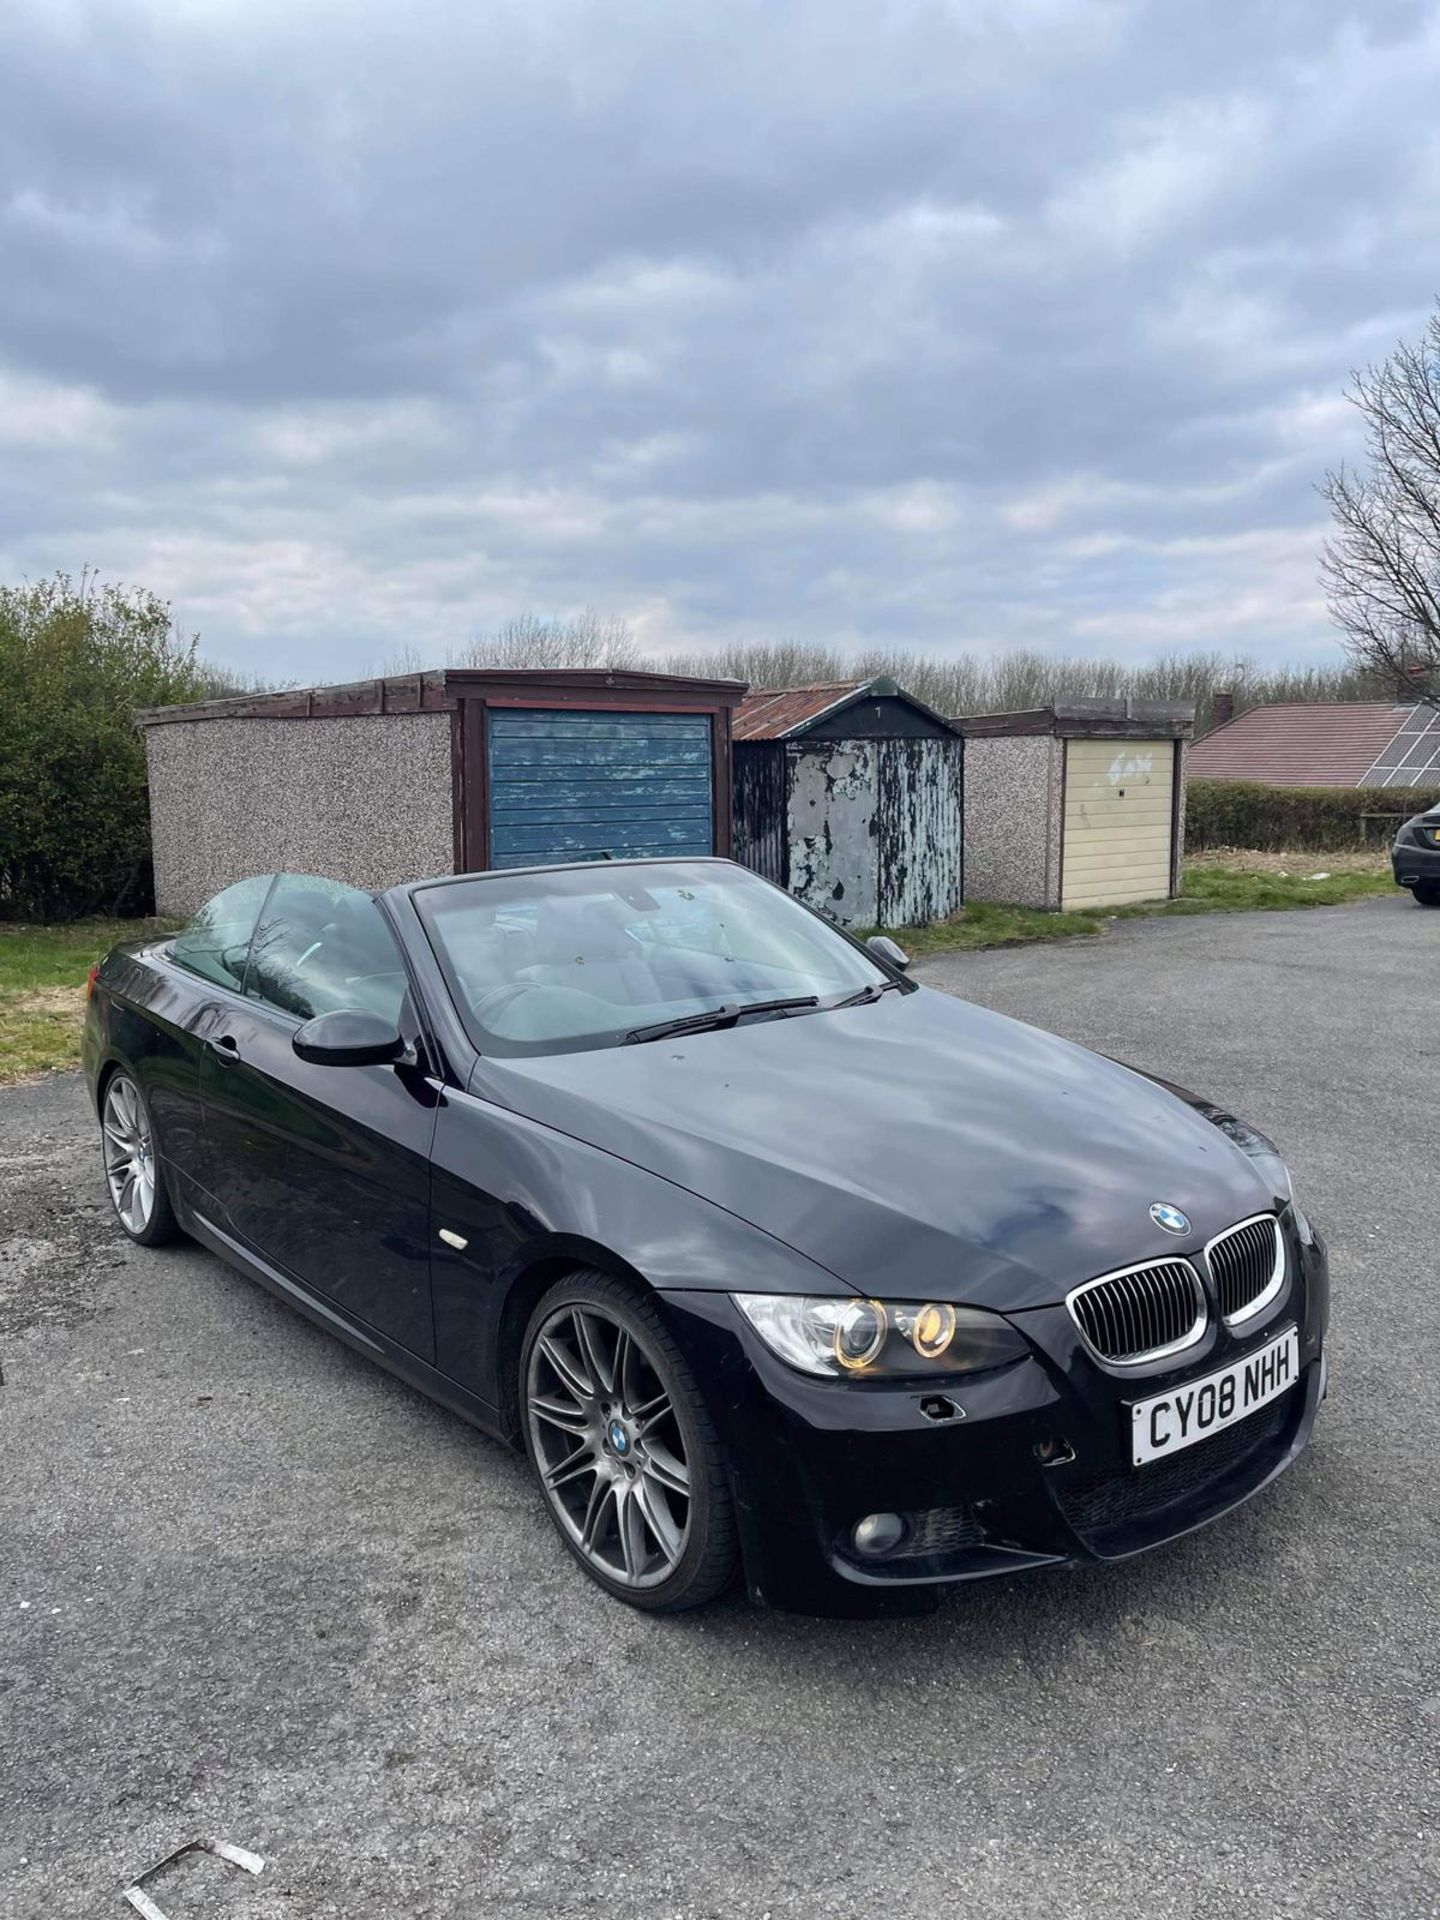 2008 BMW 3251 M SPORT CONVERTIBLE, 3.0 ENGINE, BLACK, MANUAL PETROL, CATEGORY N VDI CHECKED, NO VAT - Image 11 of 11